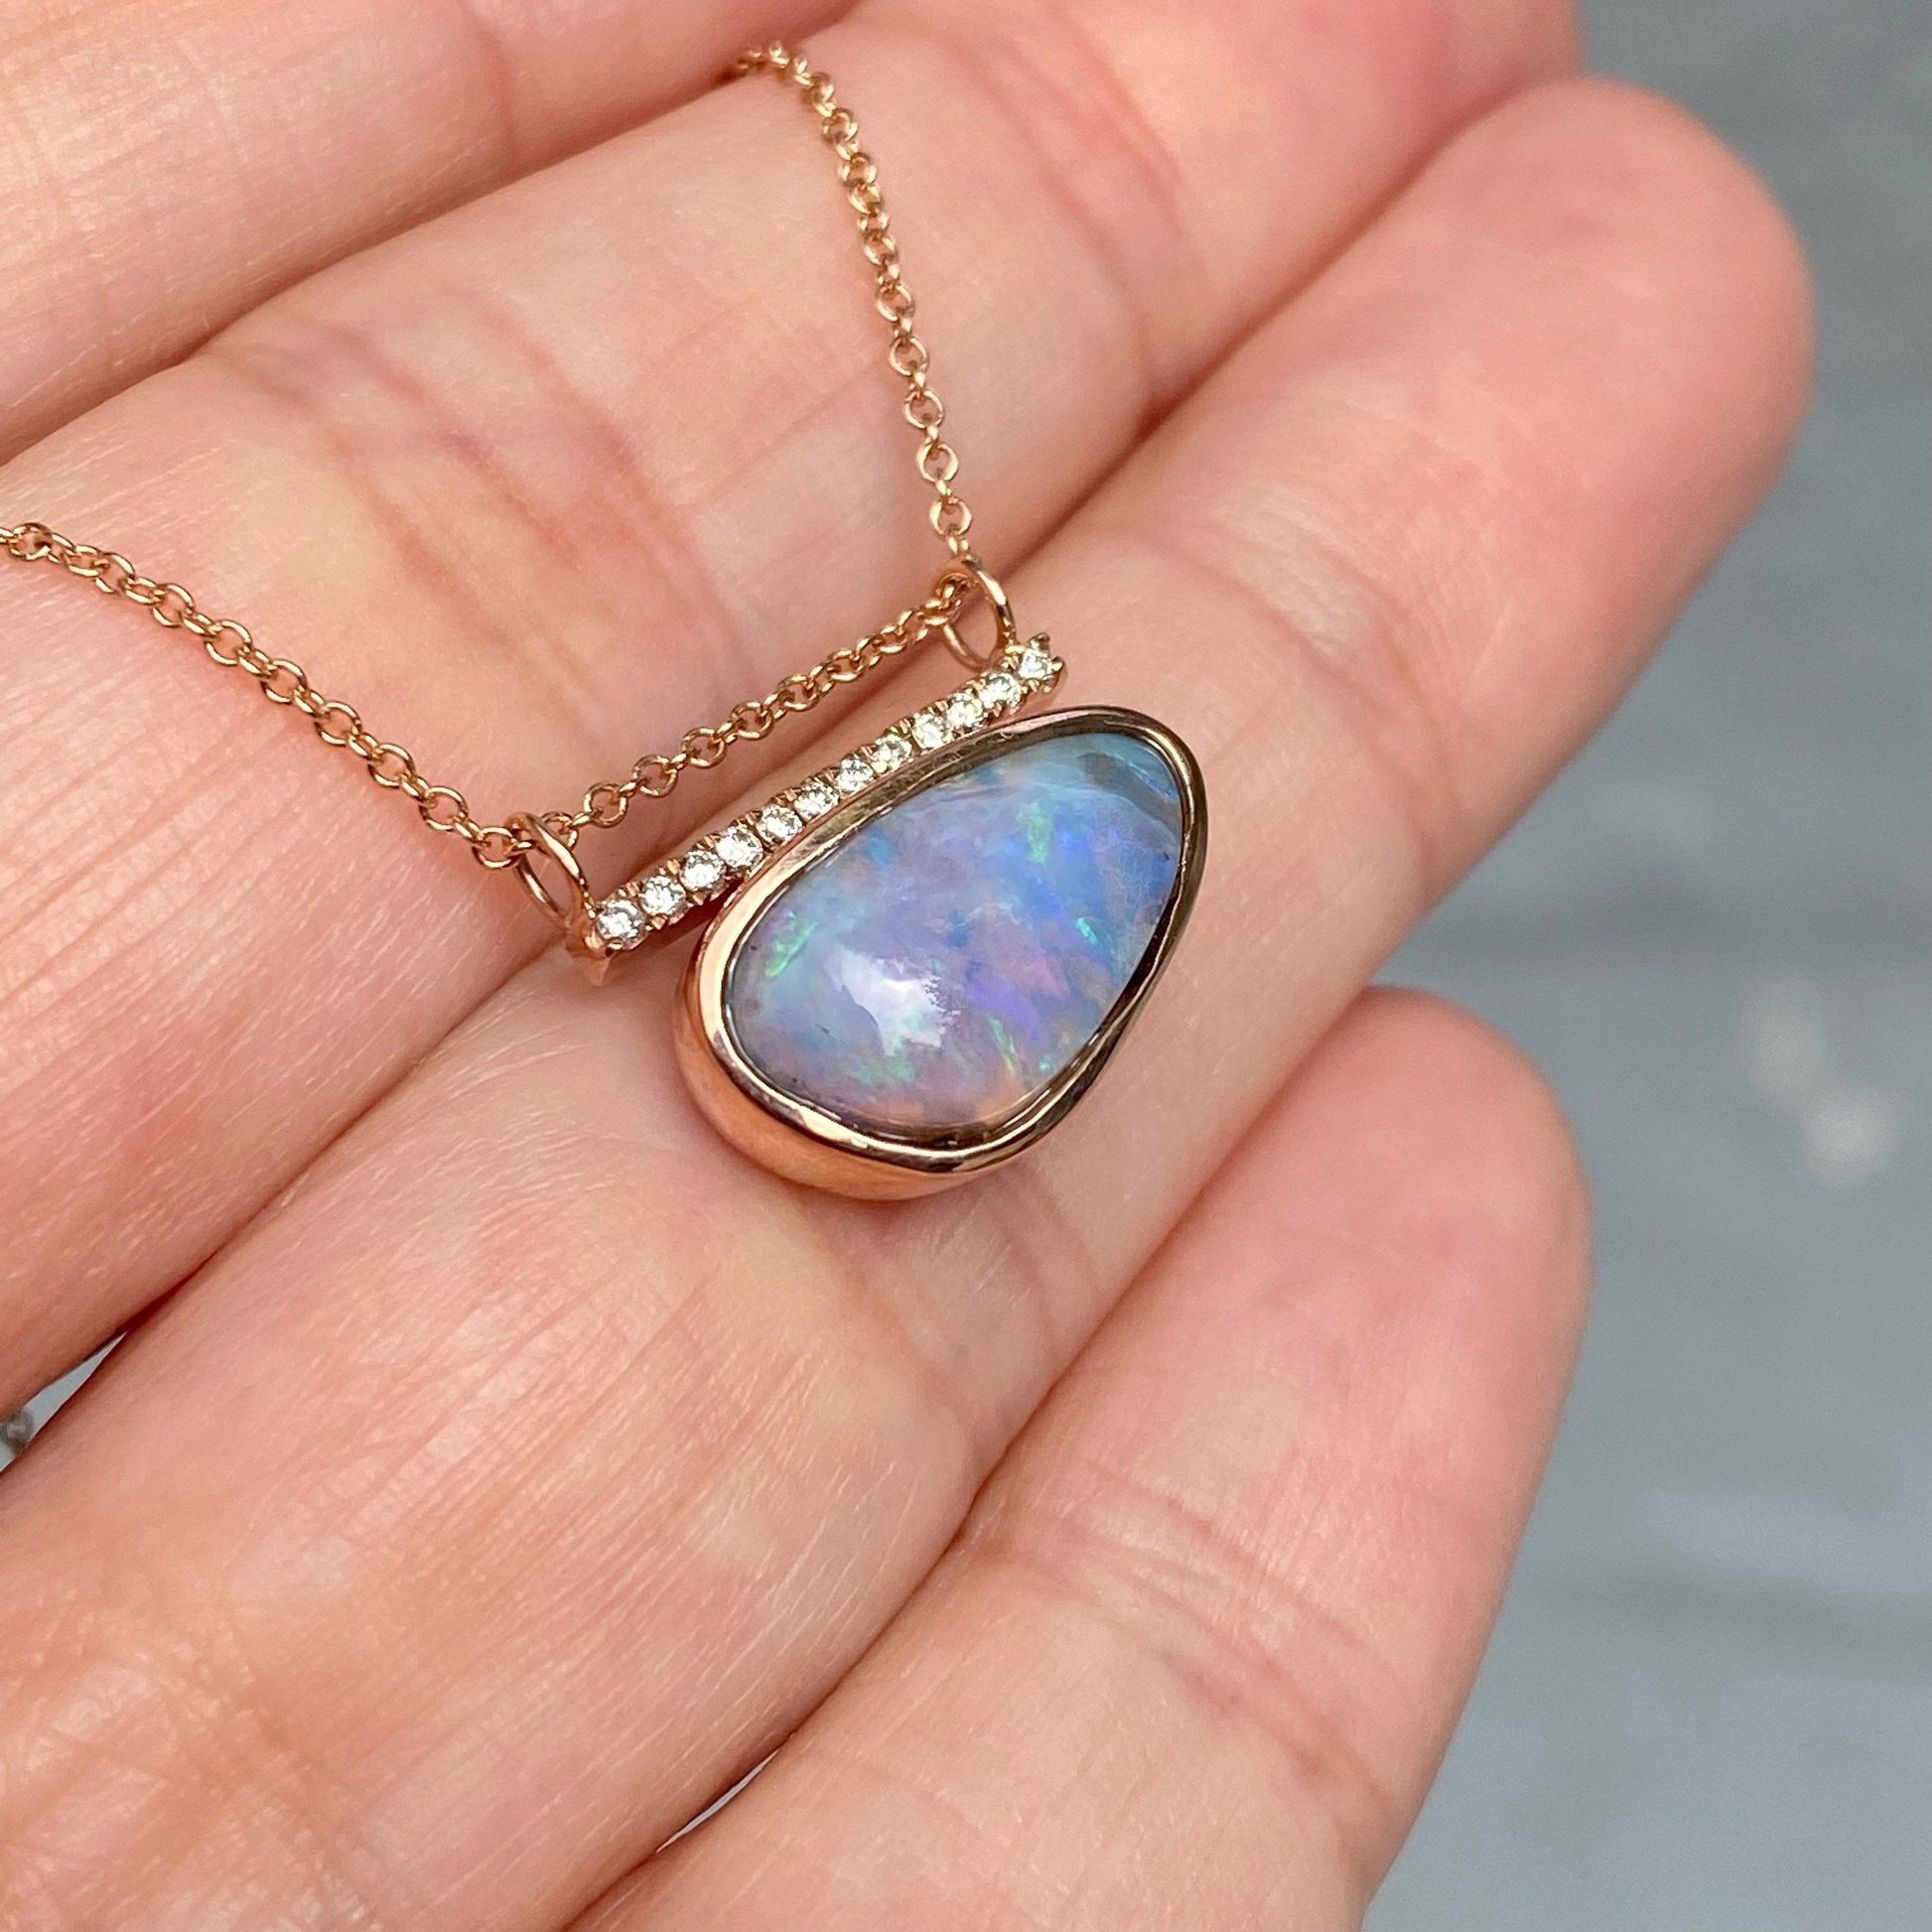 Real opal necklace with lavender opal by NIXIN Jewelry